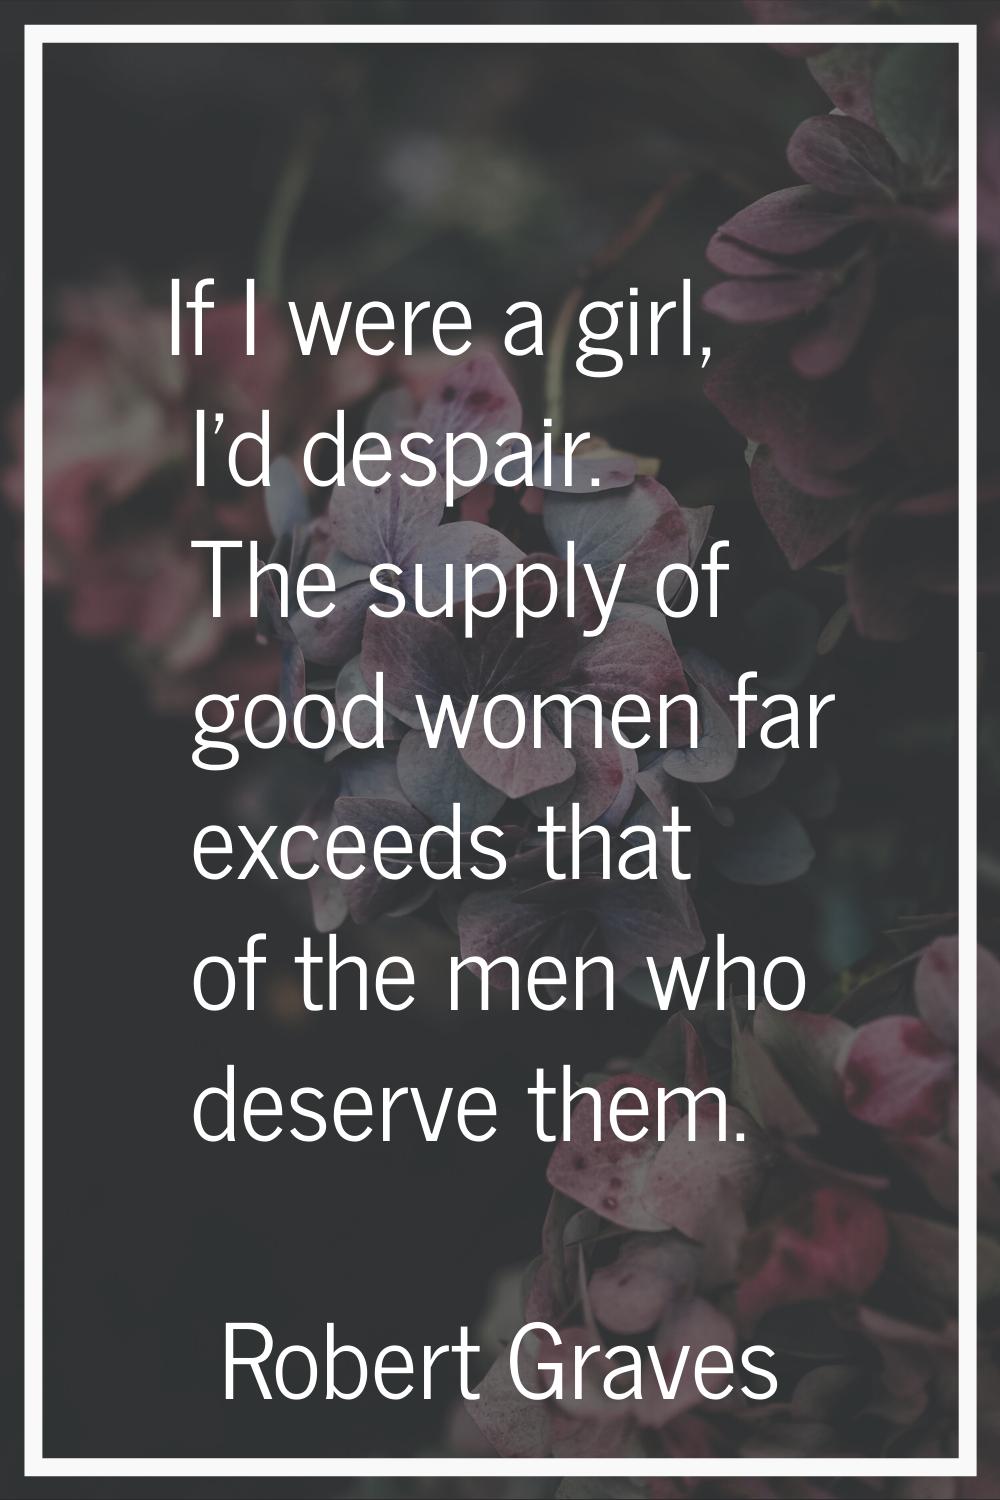 If I were a girl, I'd despair. The supply of good women far exceeds that of the men who deserve the